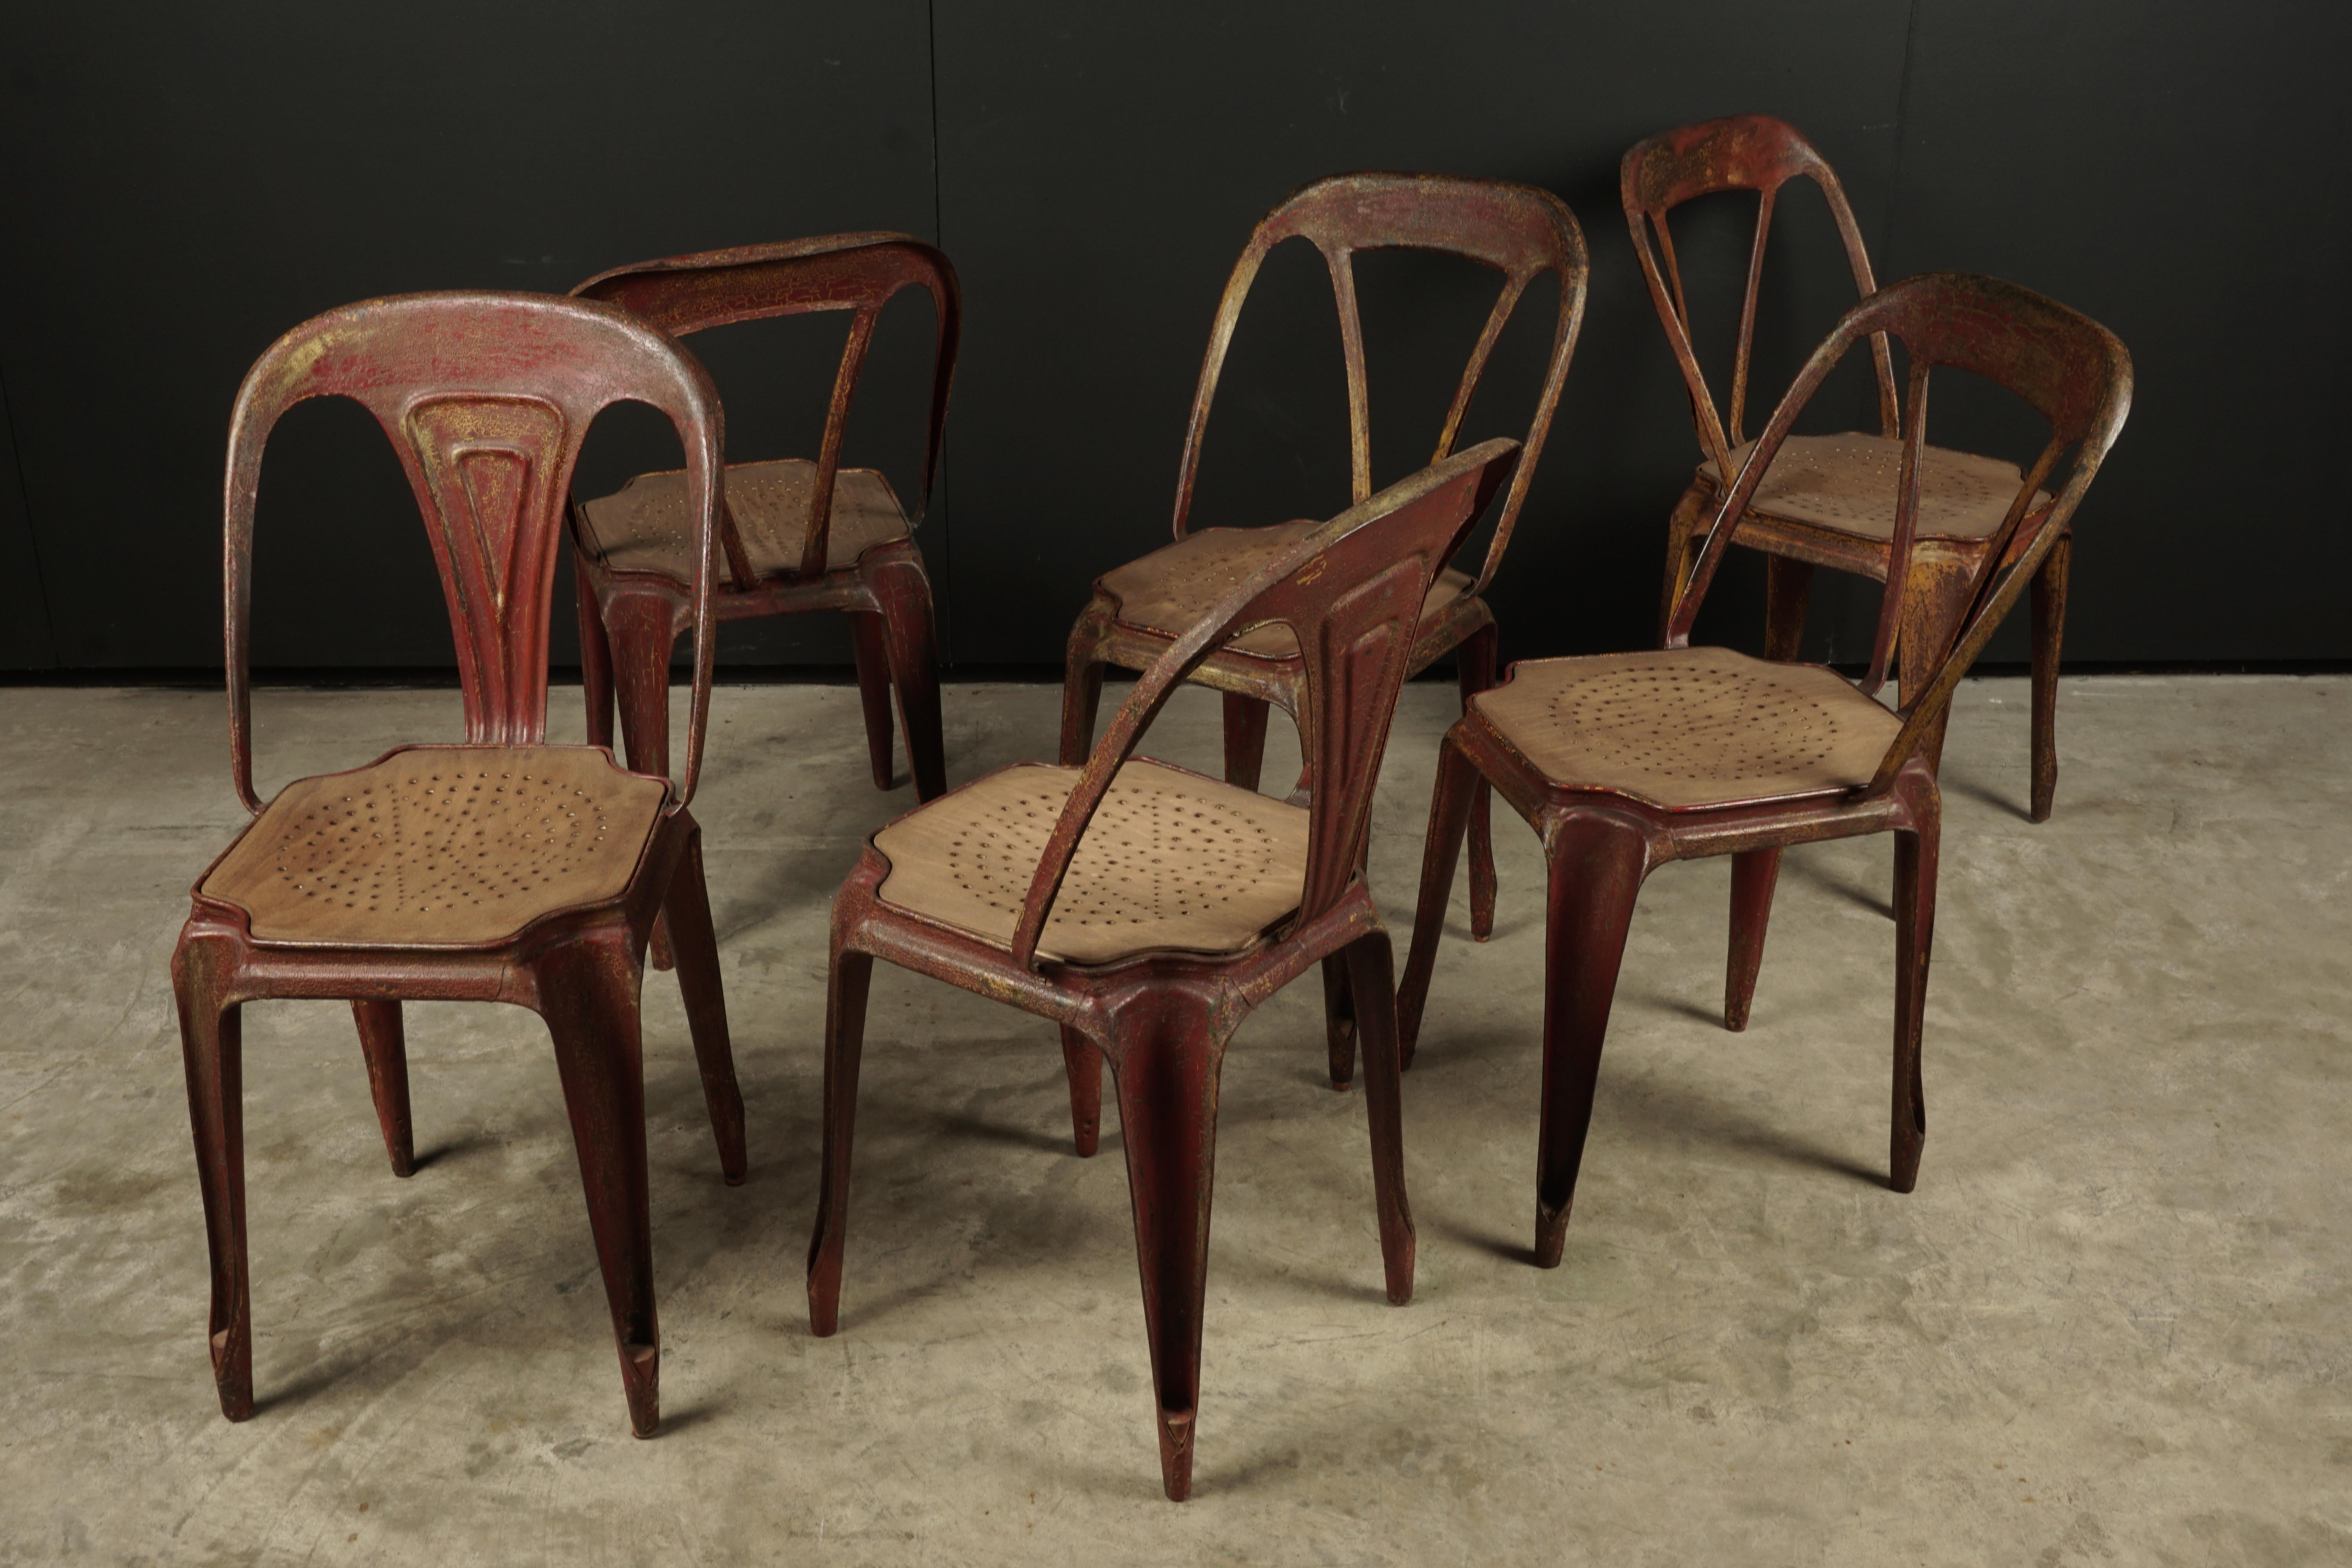 Vintage set of six Fibrocit bistro chairs, France, circa 1950. Fantastic original color and patina. Two have slightly different backs than the other four. Stackable.